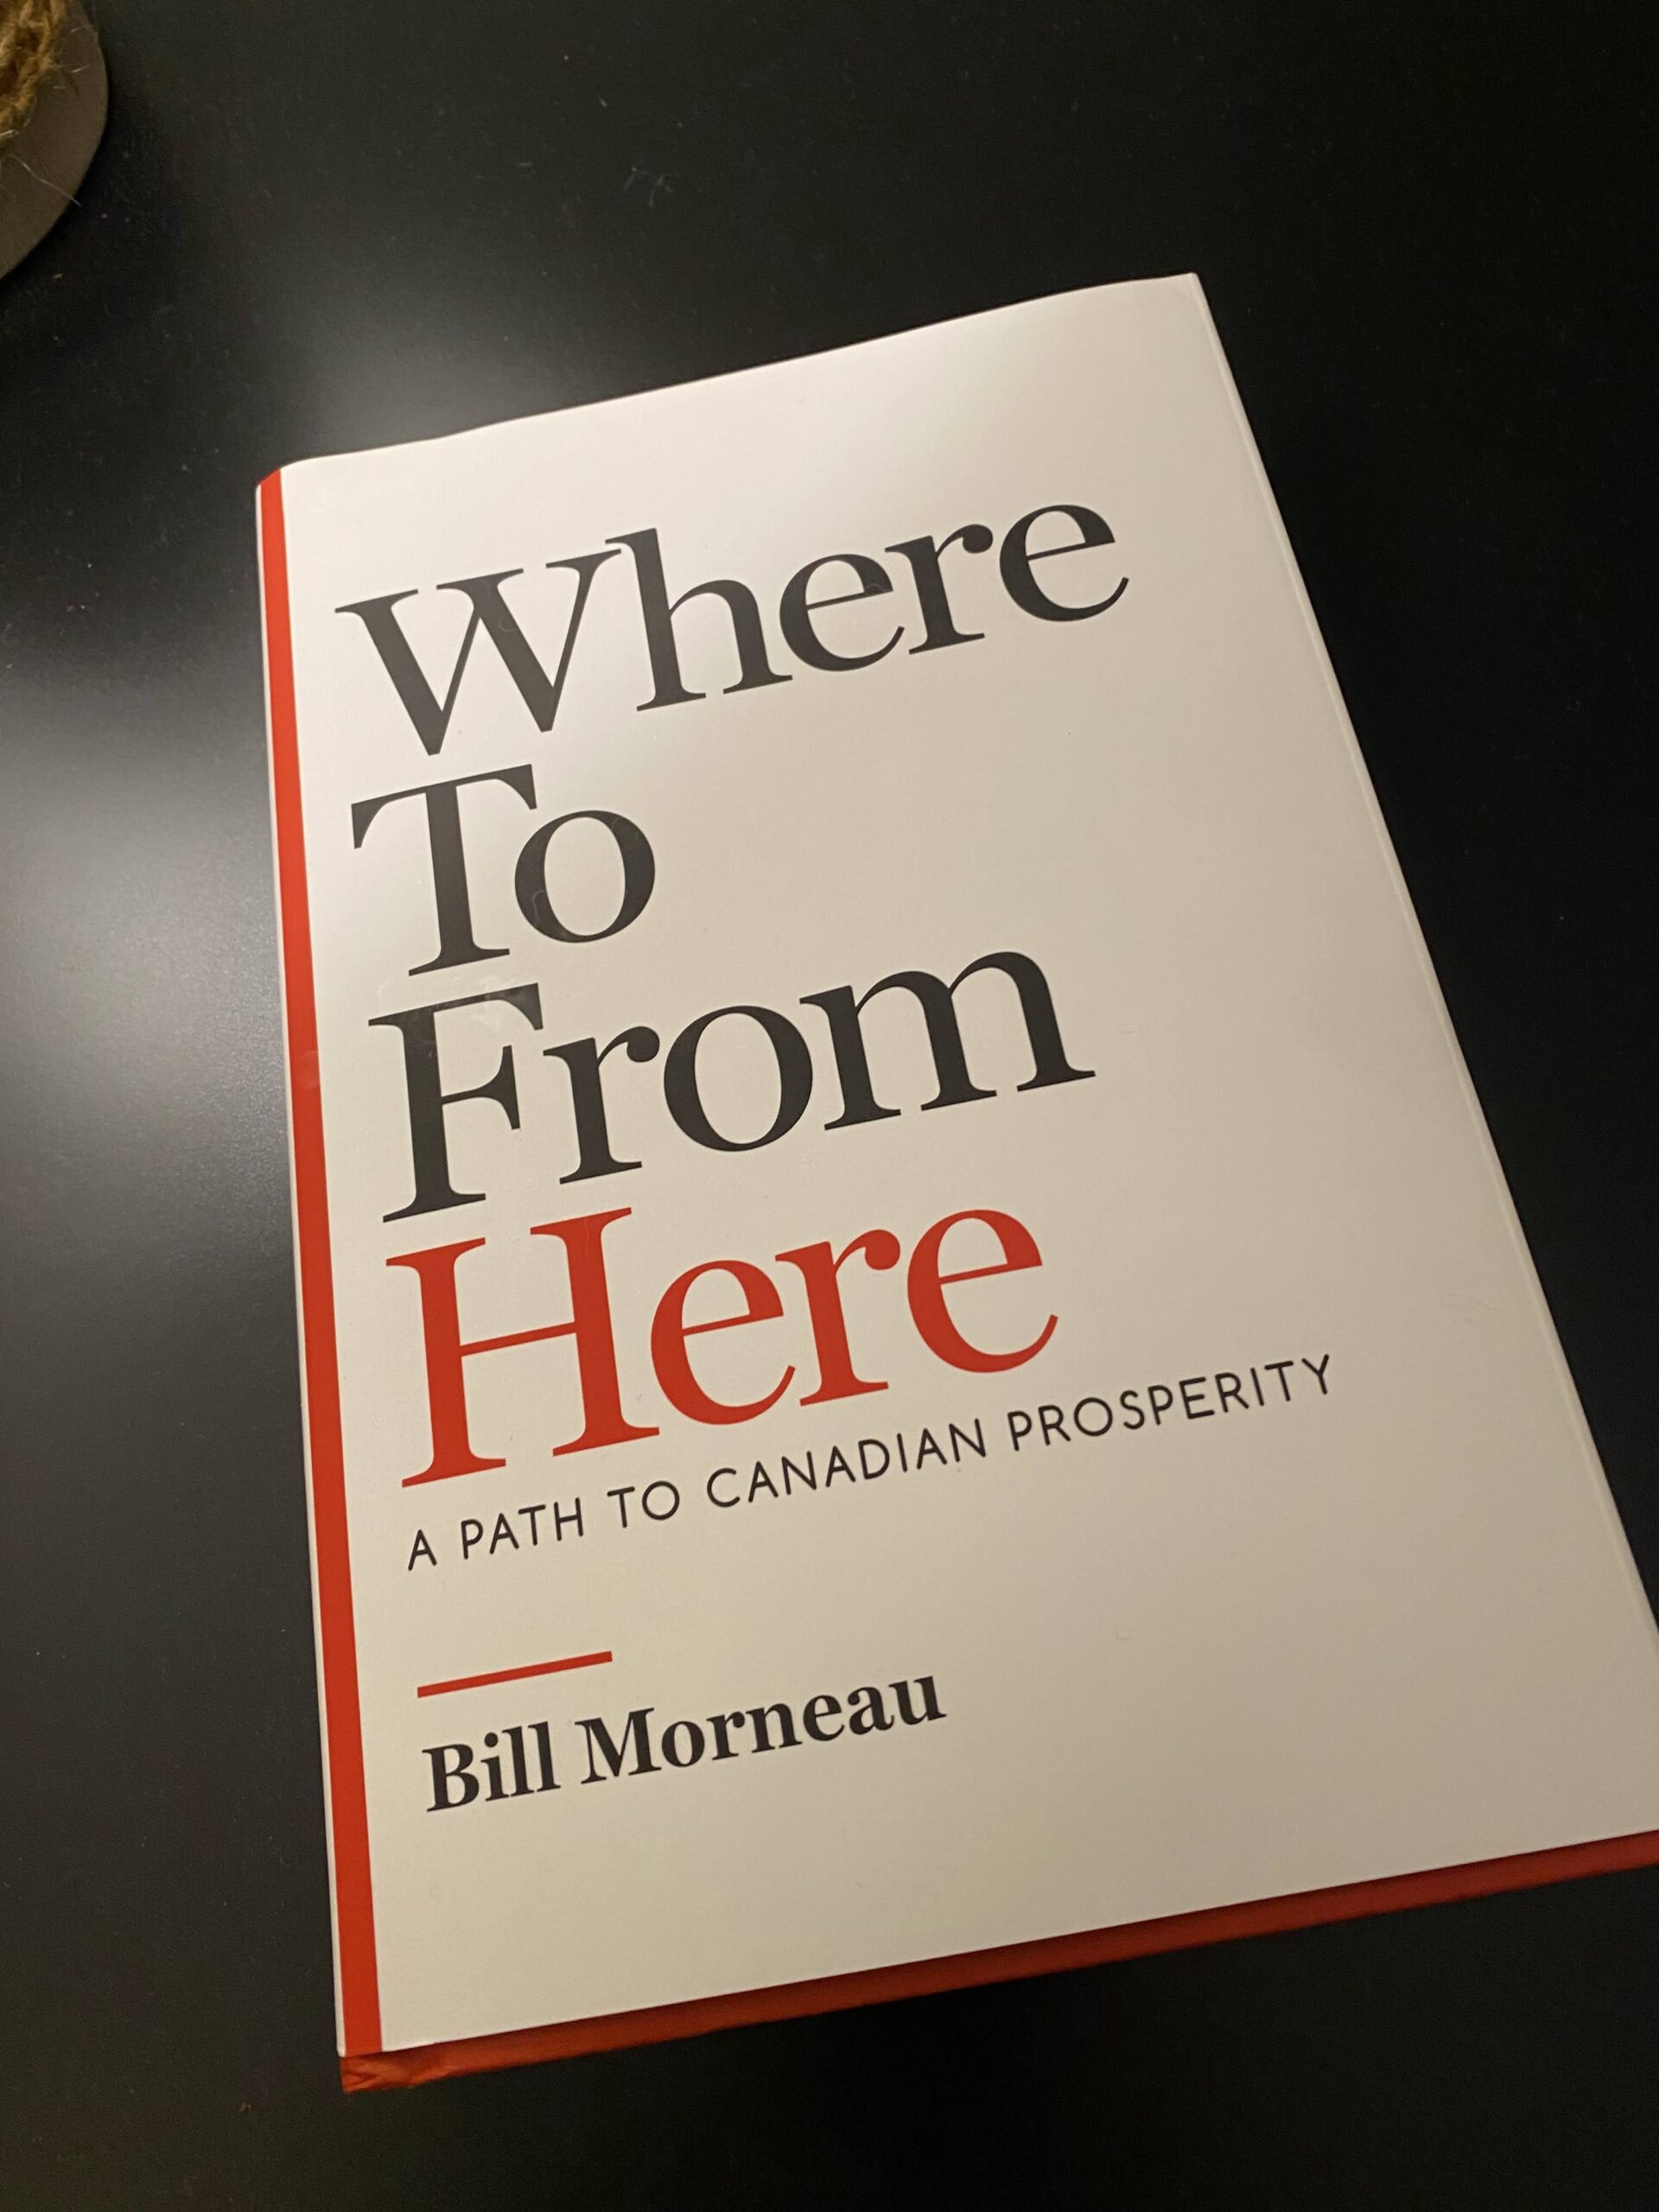 Where to from here by Bill Morneau book on a coffee table. 